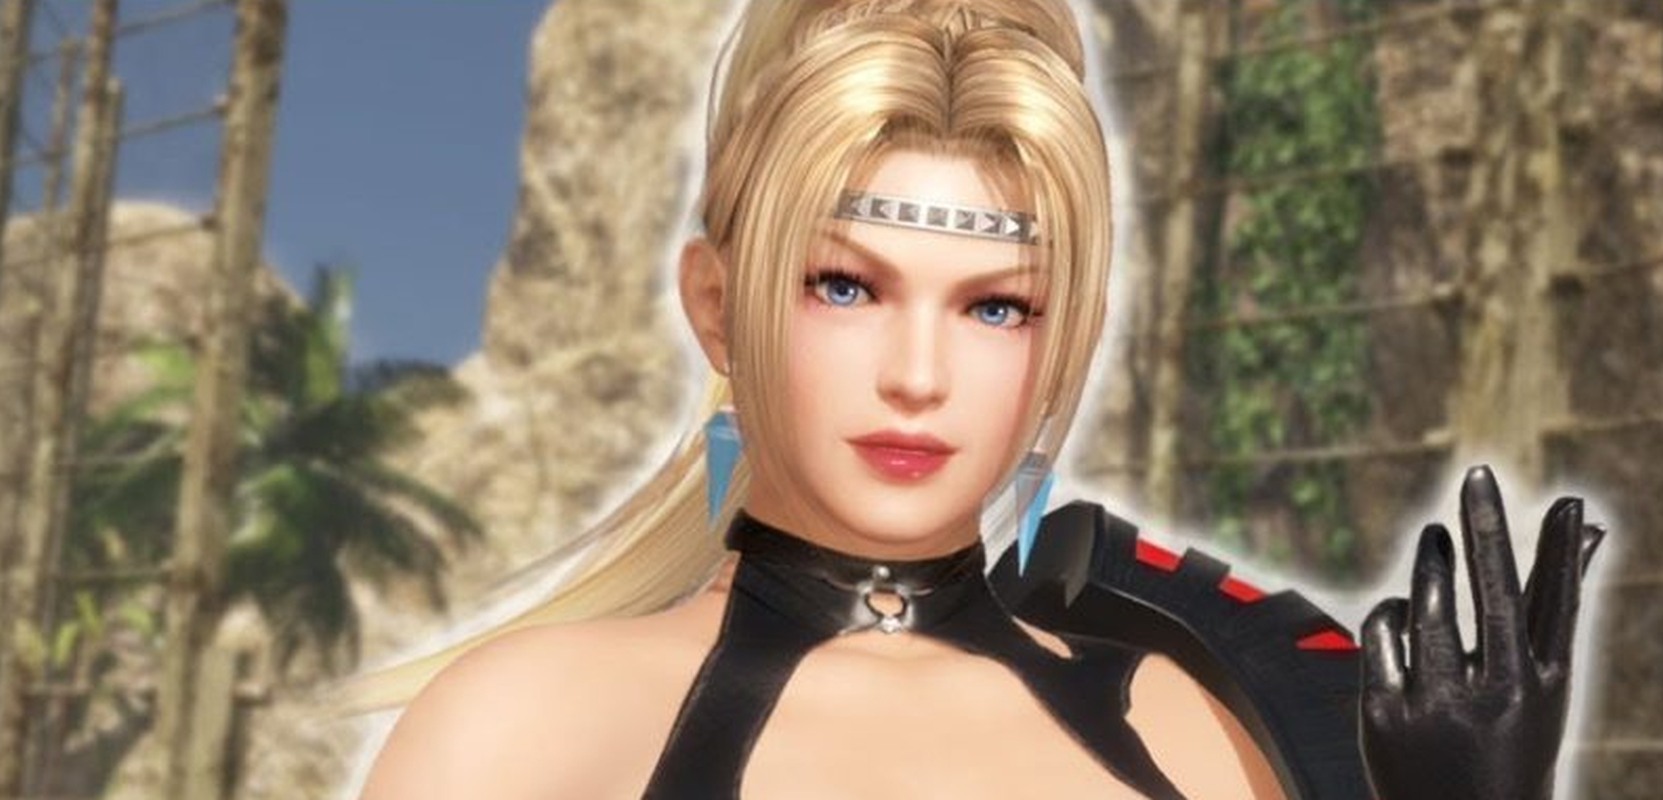 Rachel Of Ninja Gaiden Joins Dead or Alive 6 Along With Anime Collaboration